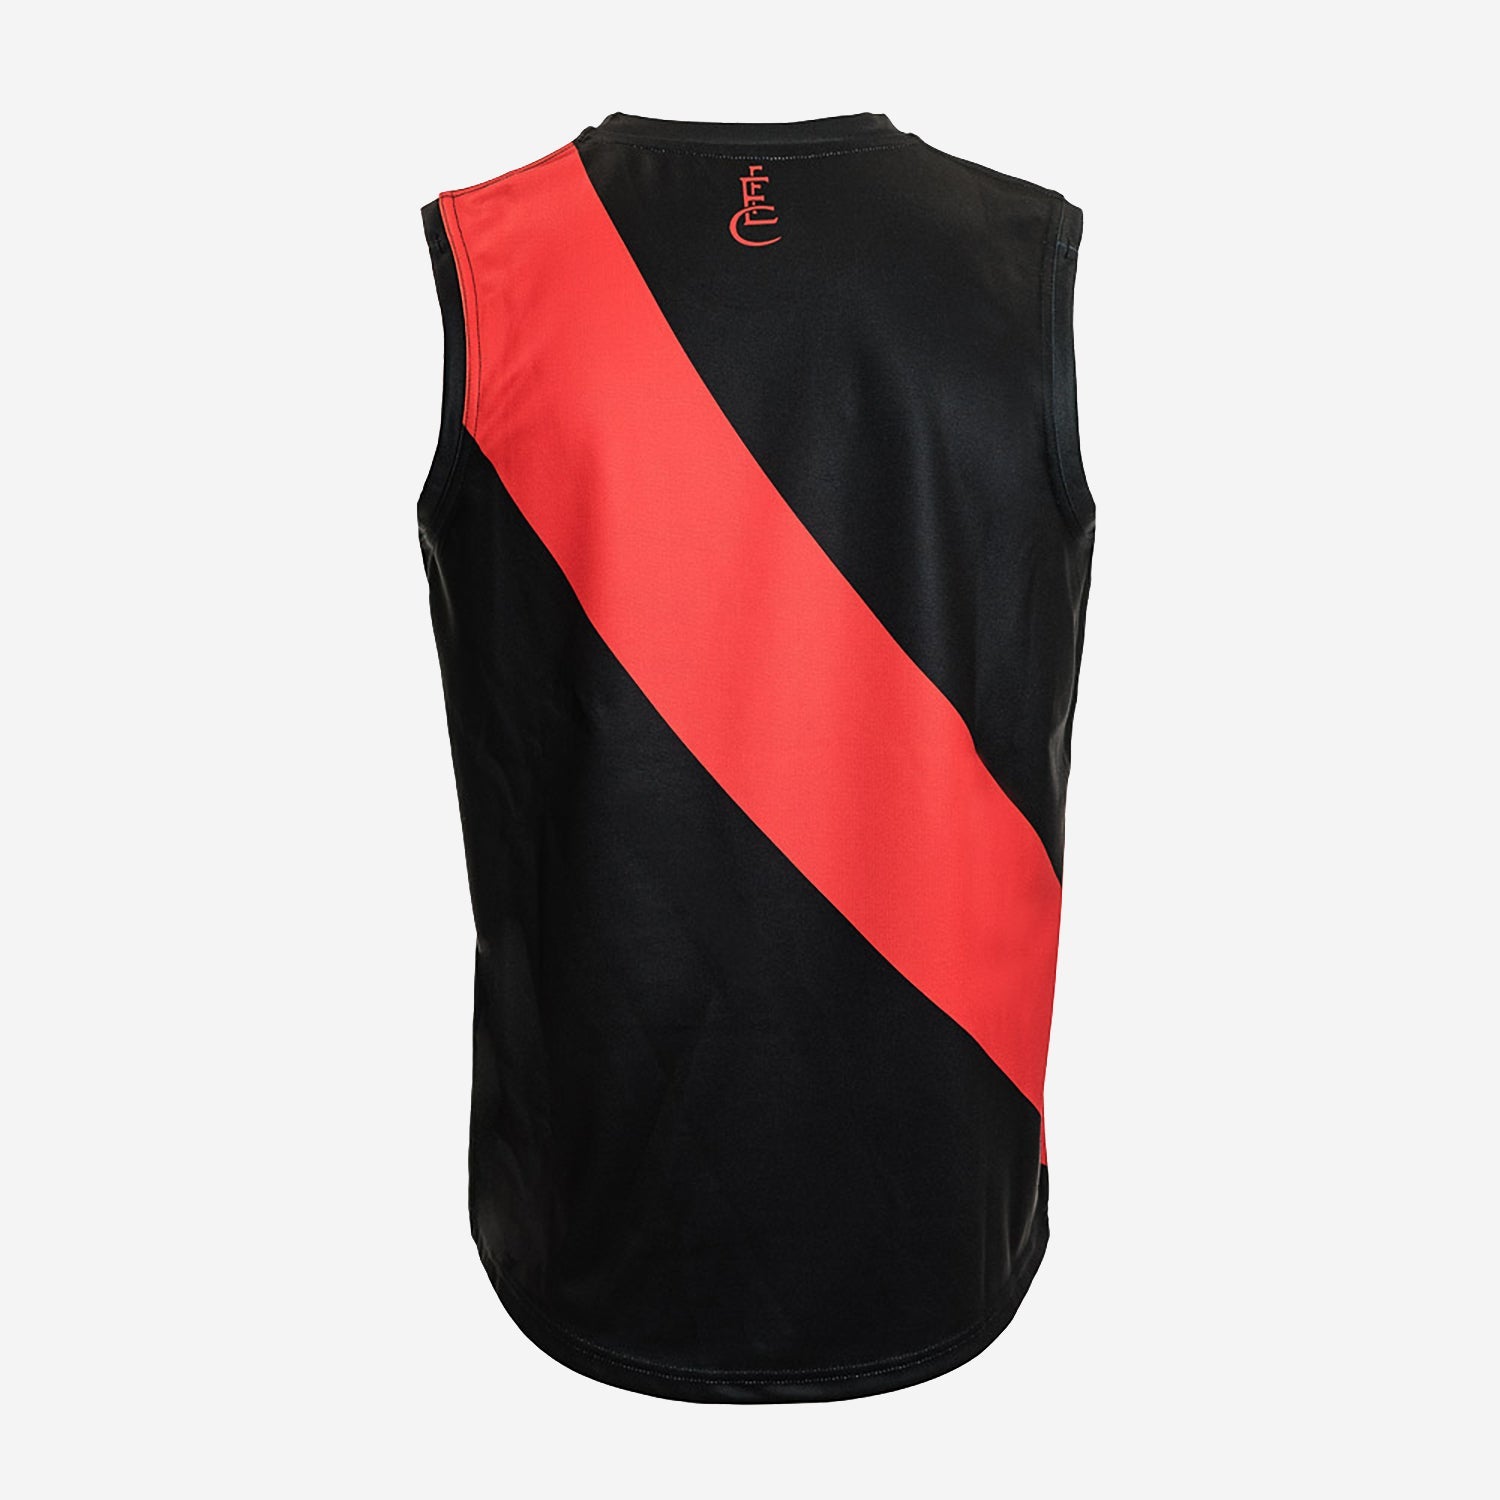 Essendon Bombers - AFL Replica Youth Guernsey - The Cricket Warehouse